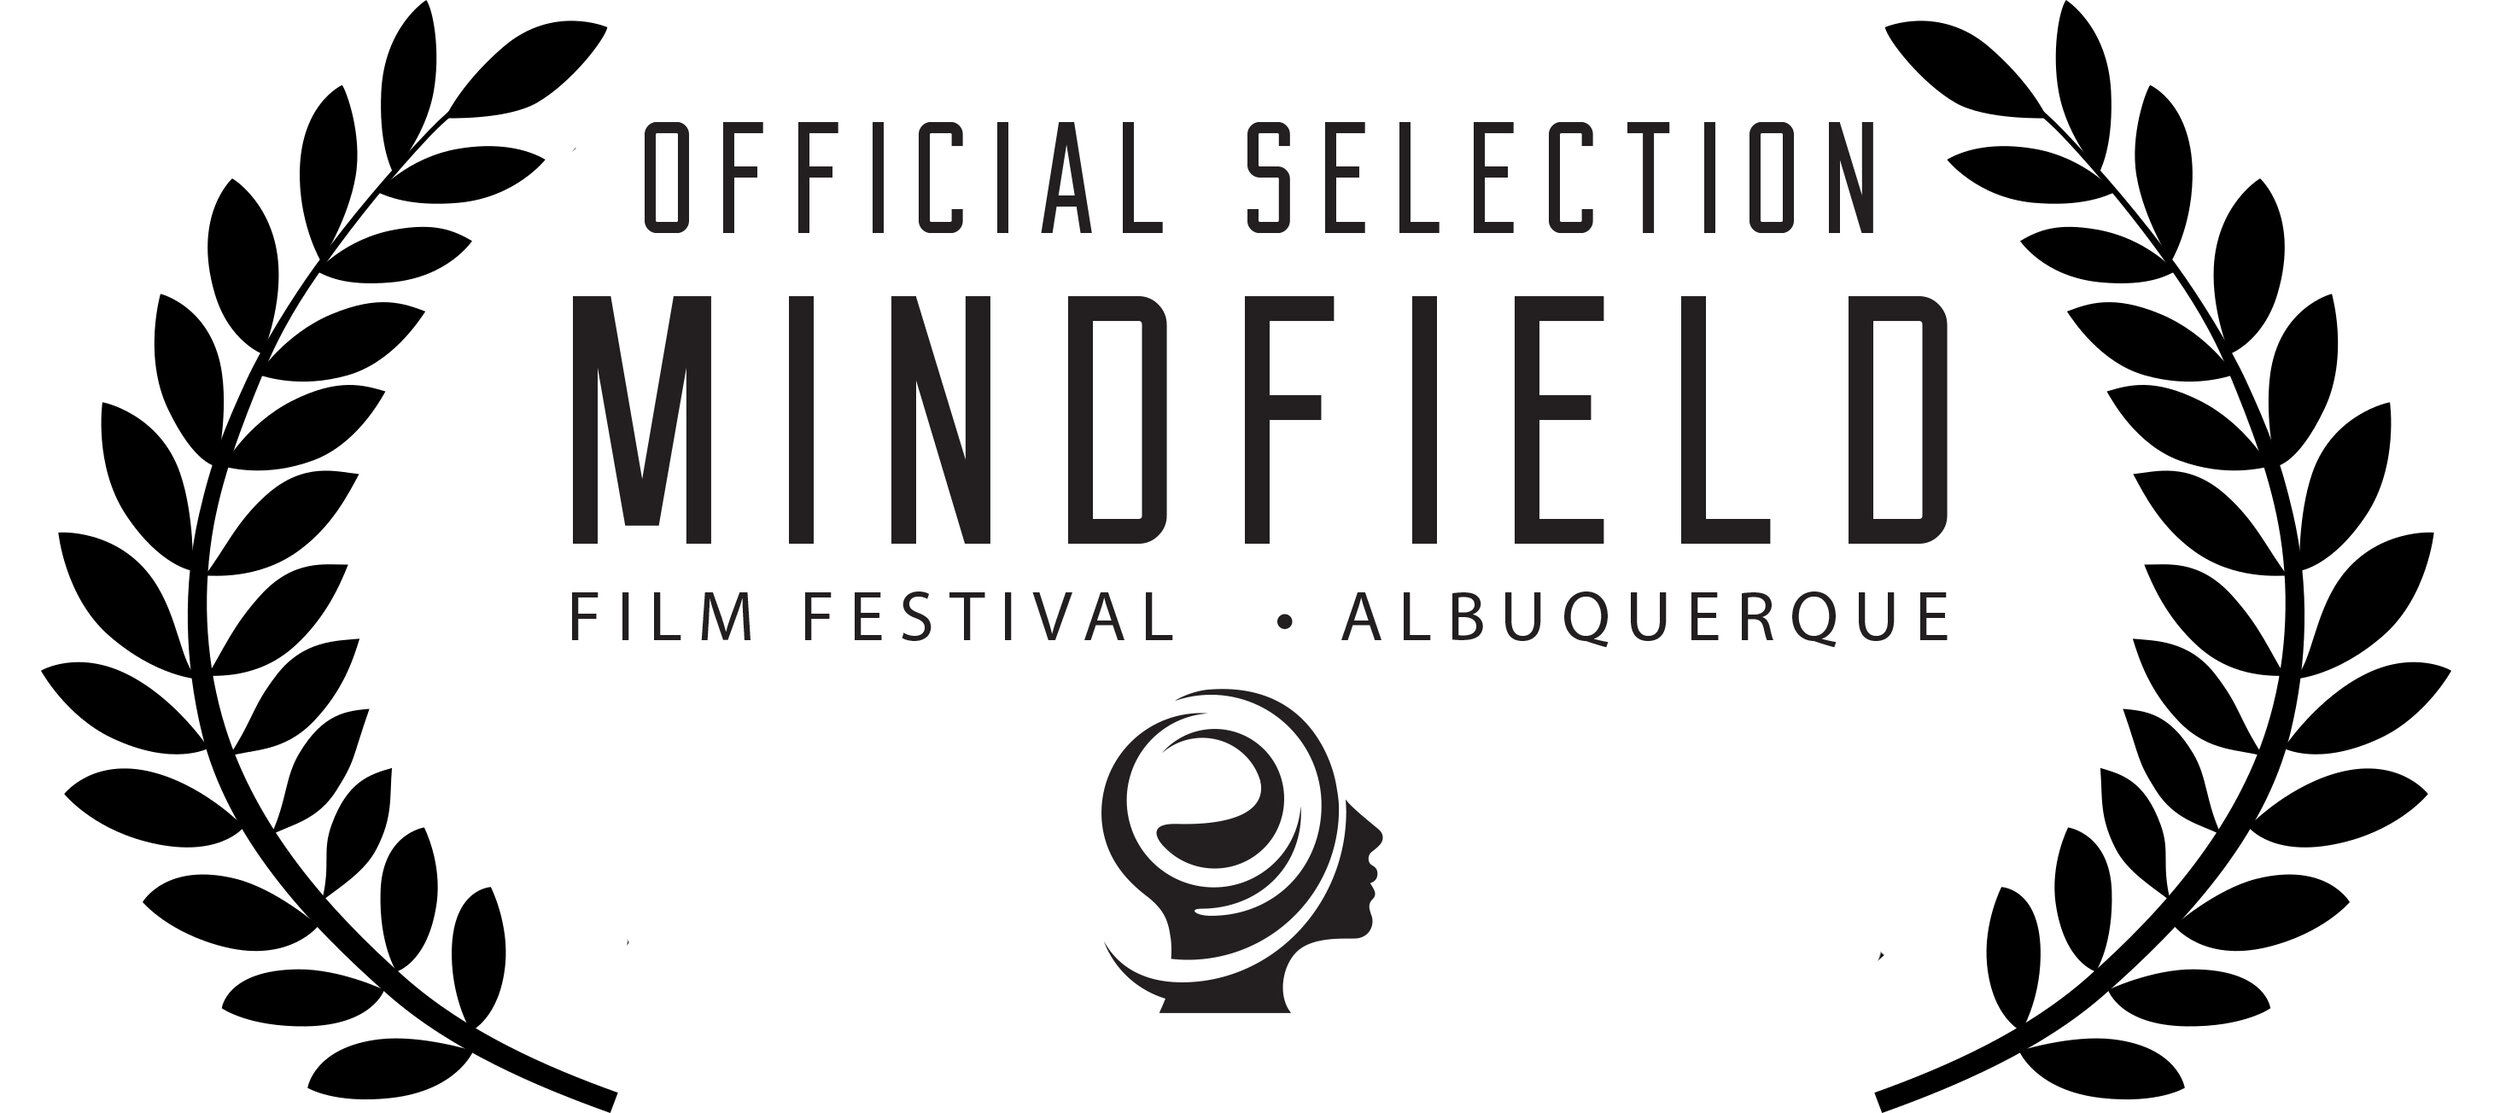 TRL_Mindfield ABQ Official Selection Laurel.jpg